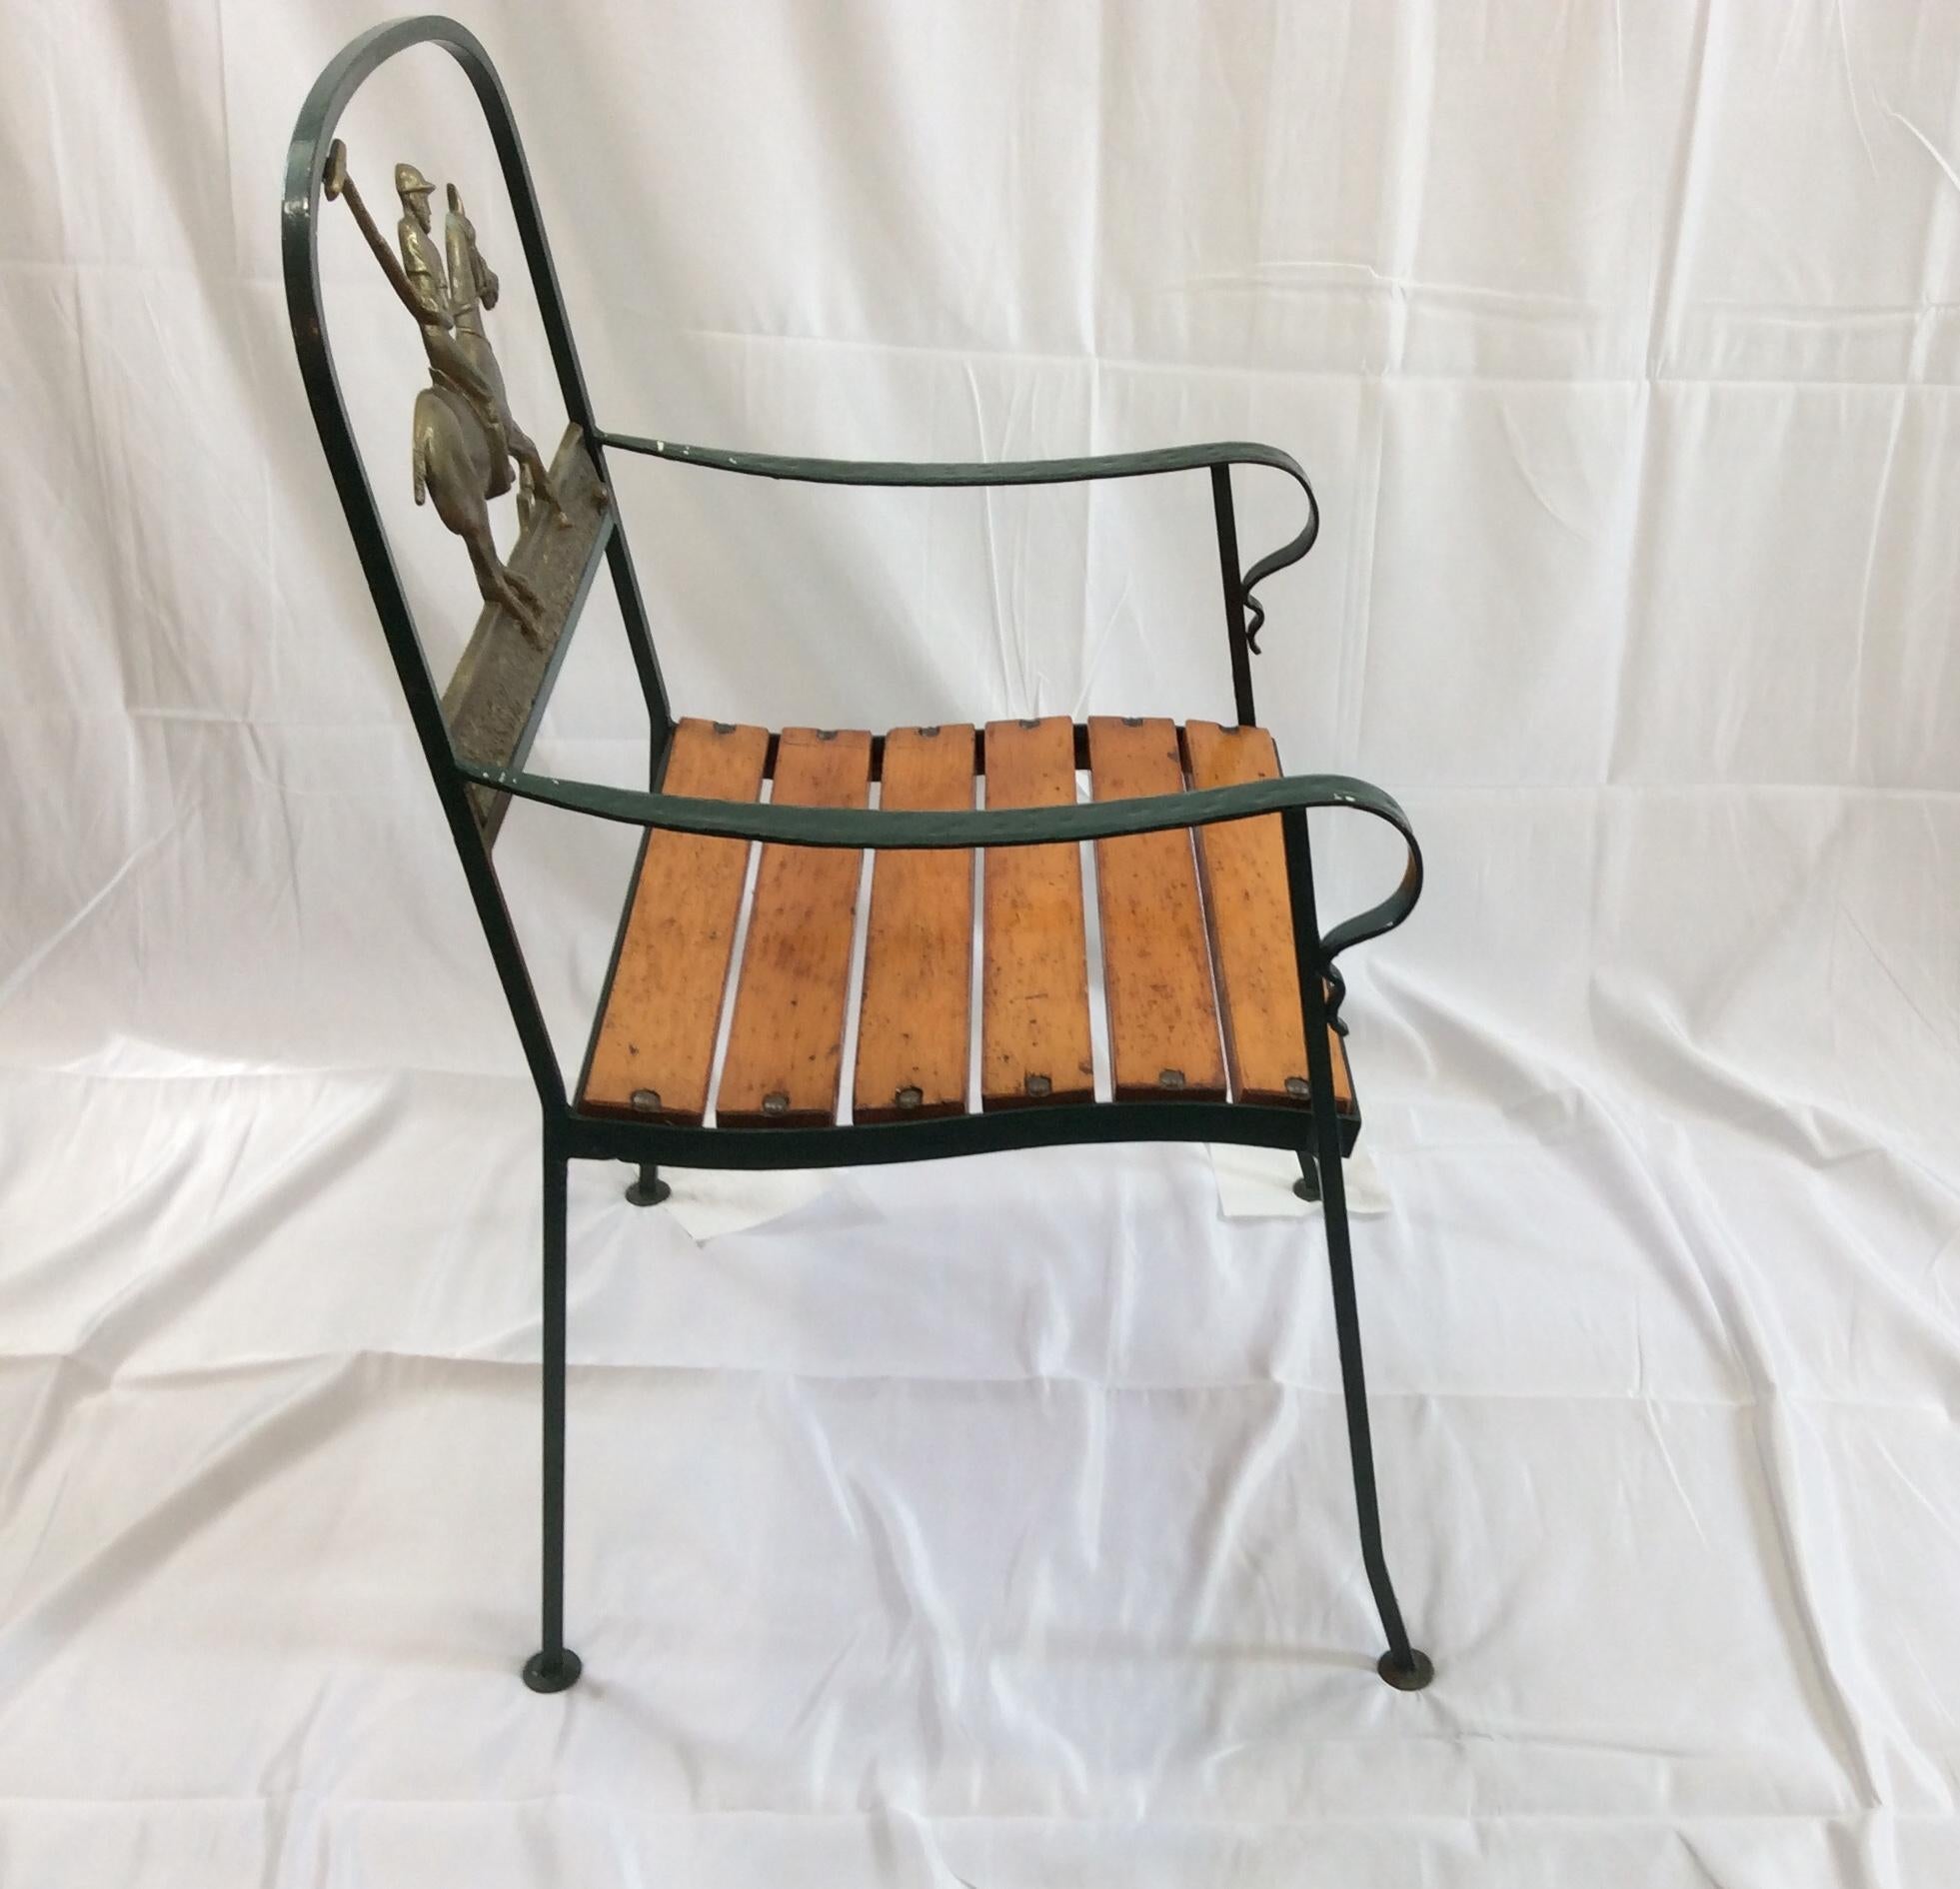 Florentine Craftsmen Polo Player Back Wrought Iron Armchair Made for MJ Knoud In Good Condition For Sale In Southampton, NY